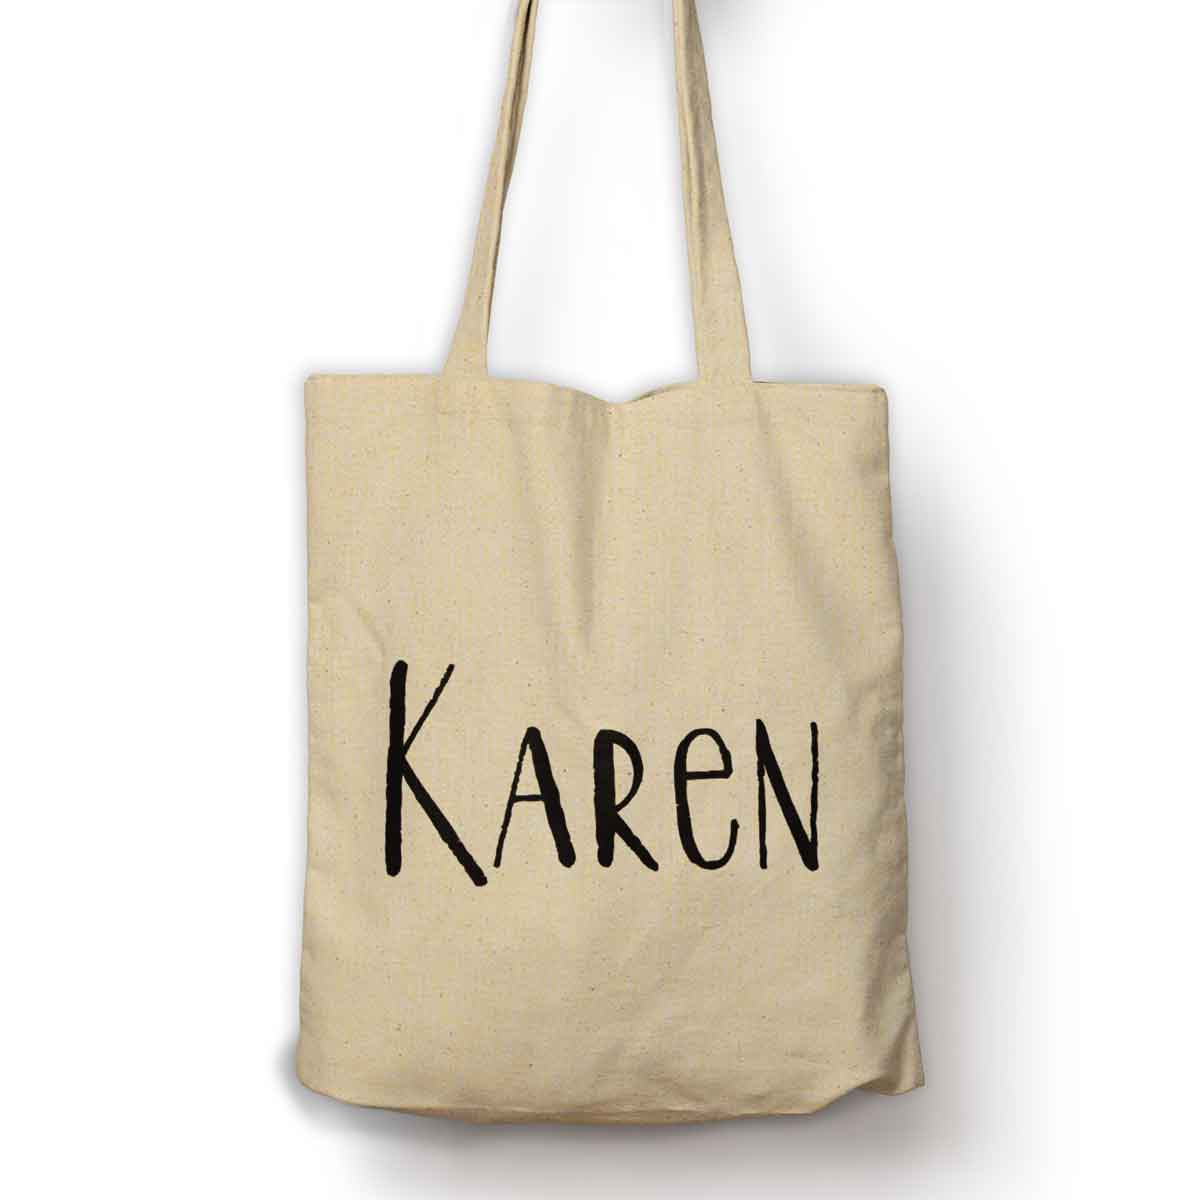 Personalised shopping tote bag. With your name.